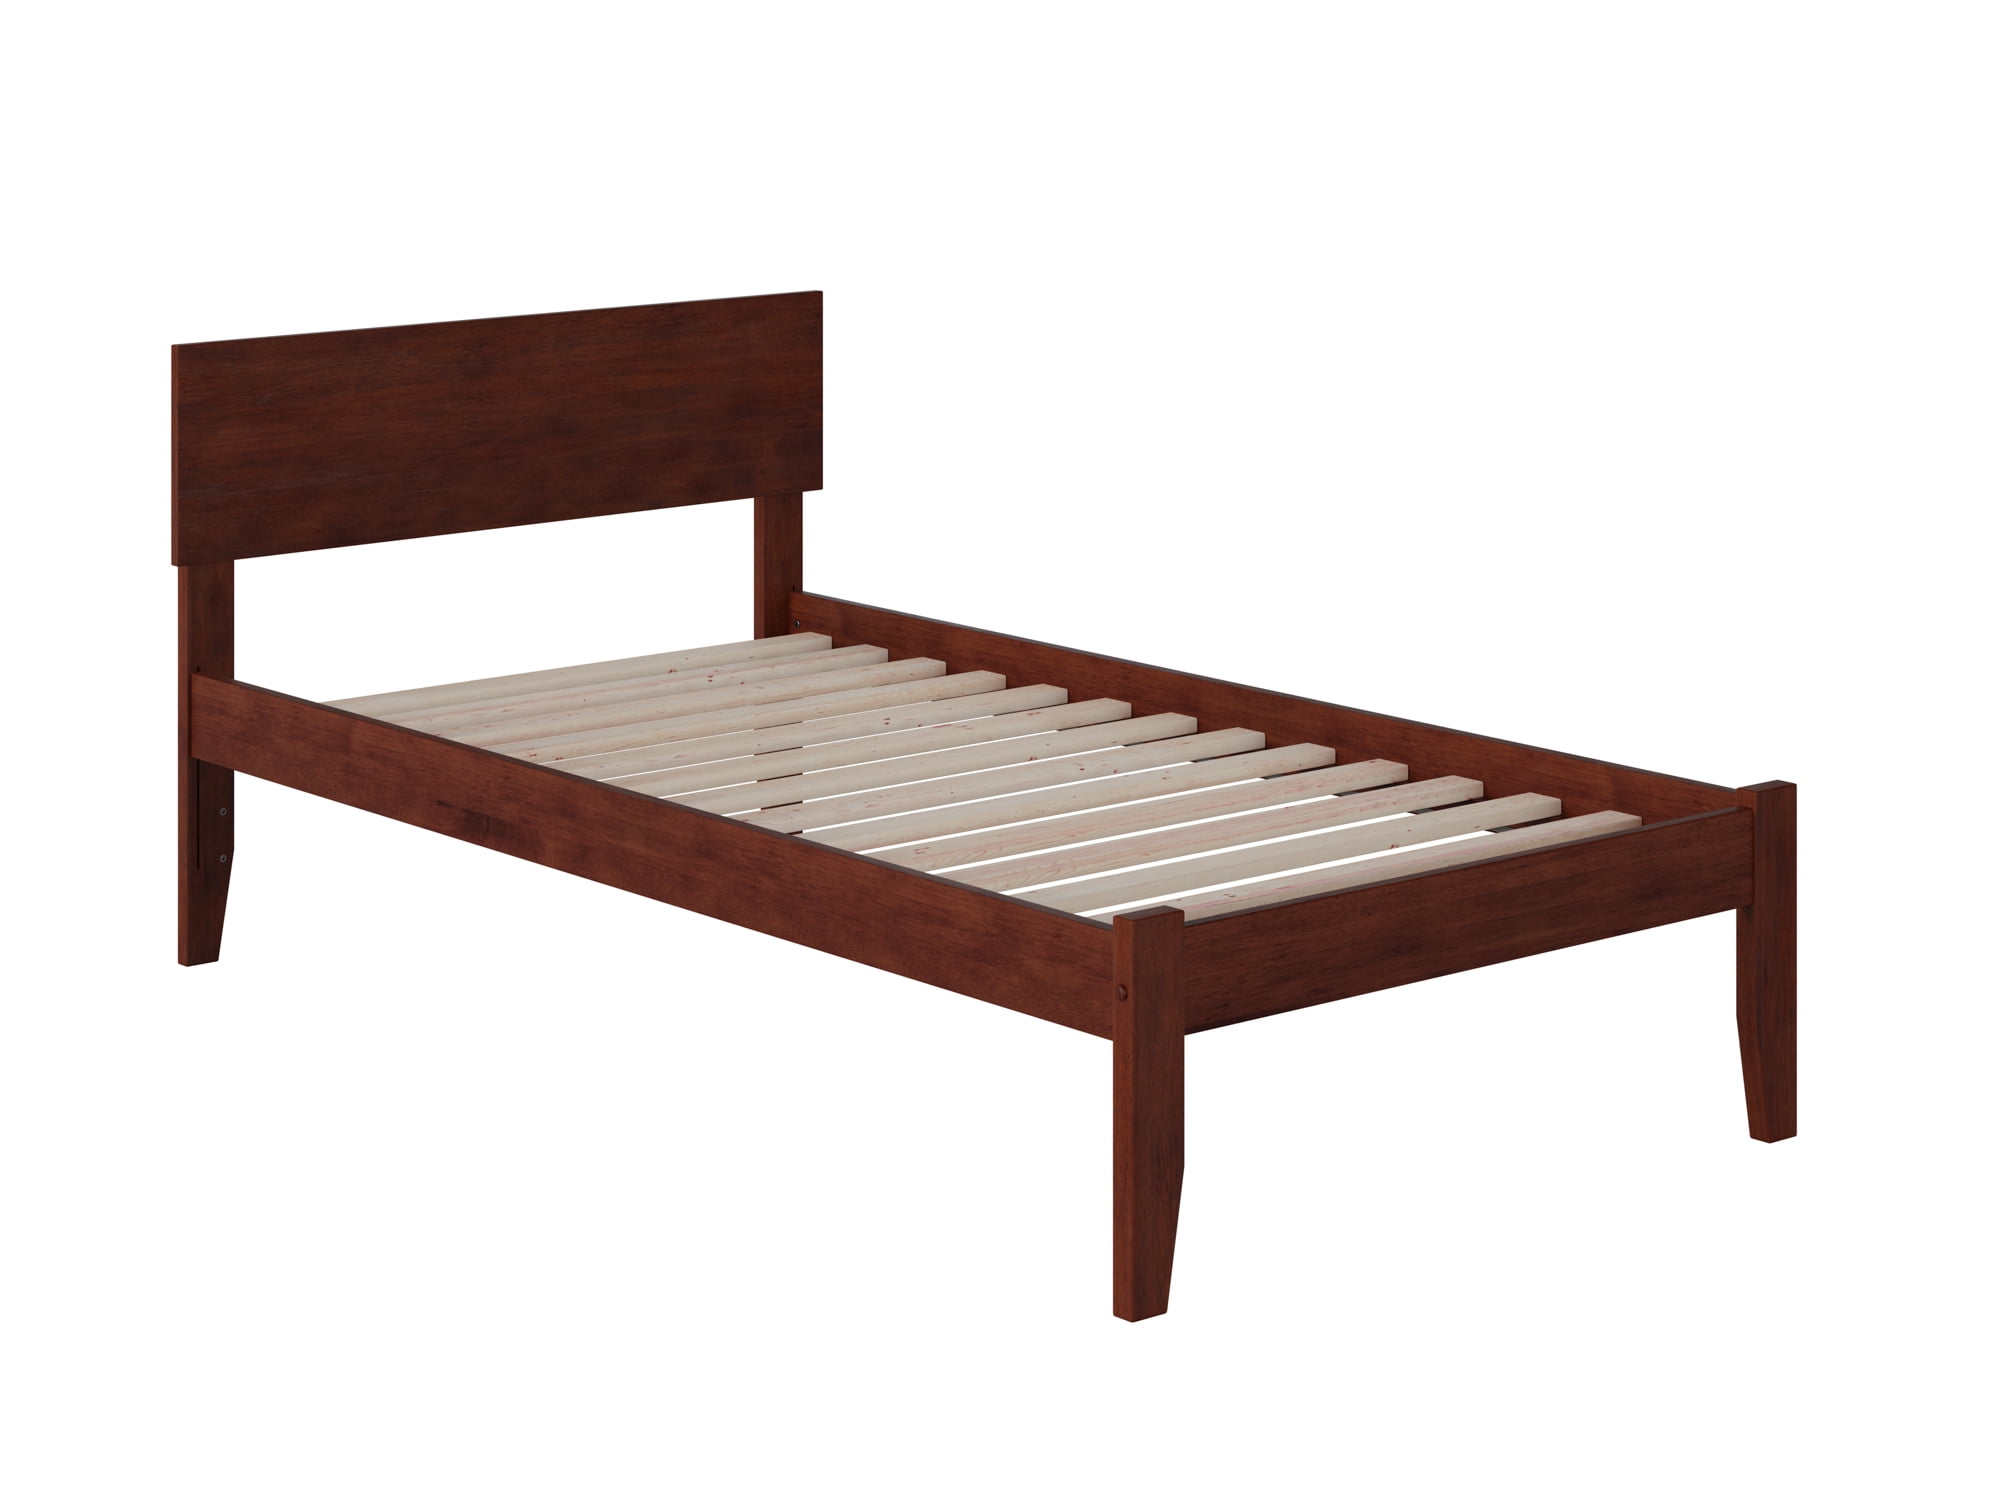 Ar8111004 Orlando Open Foot Bed, Antique Walnut - Twin Extra Large